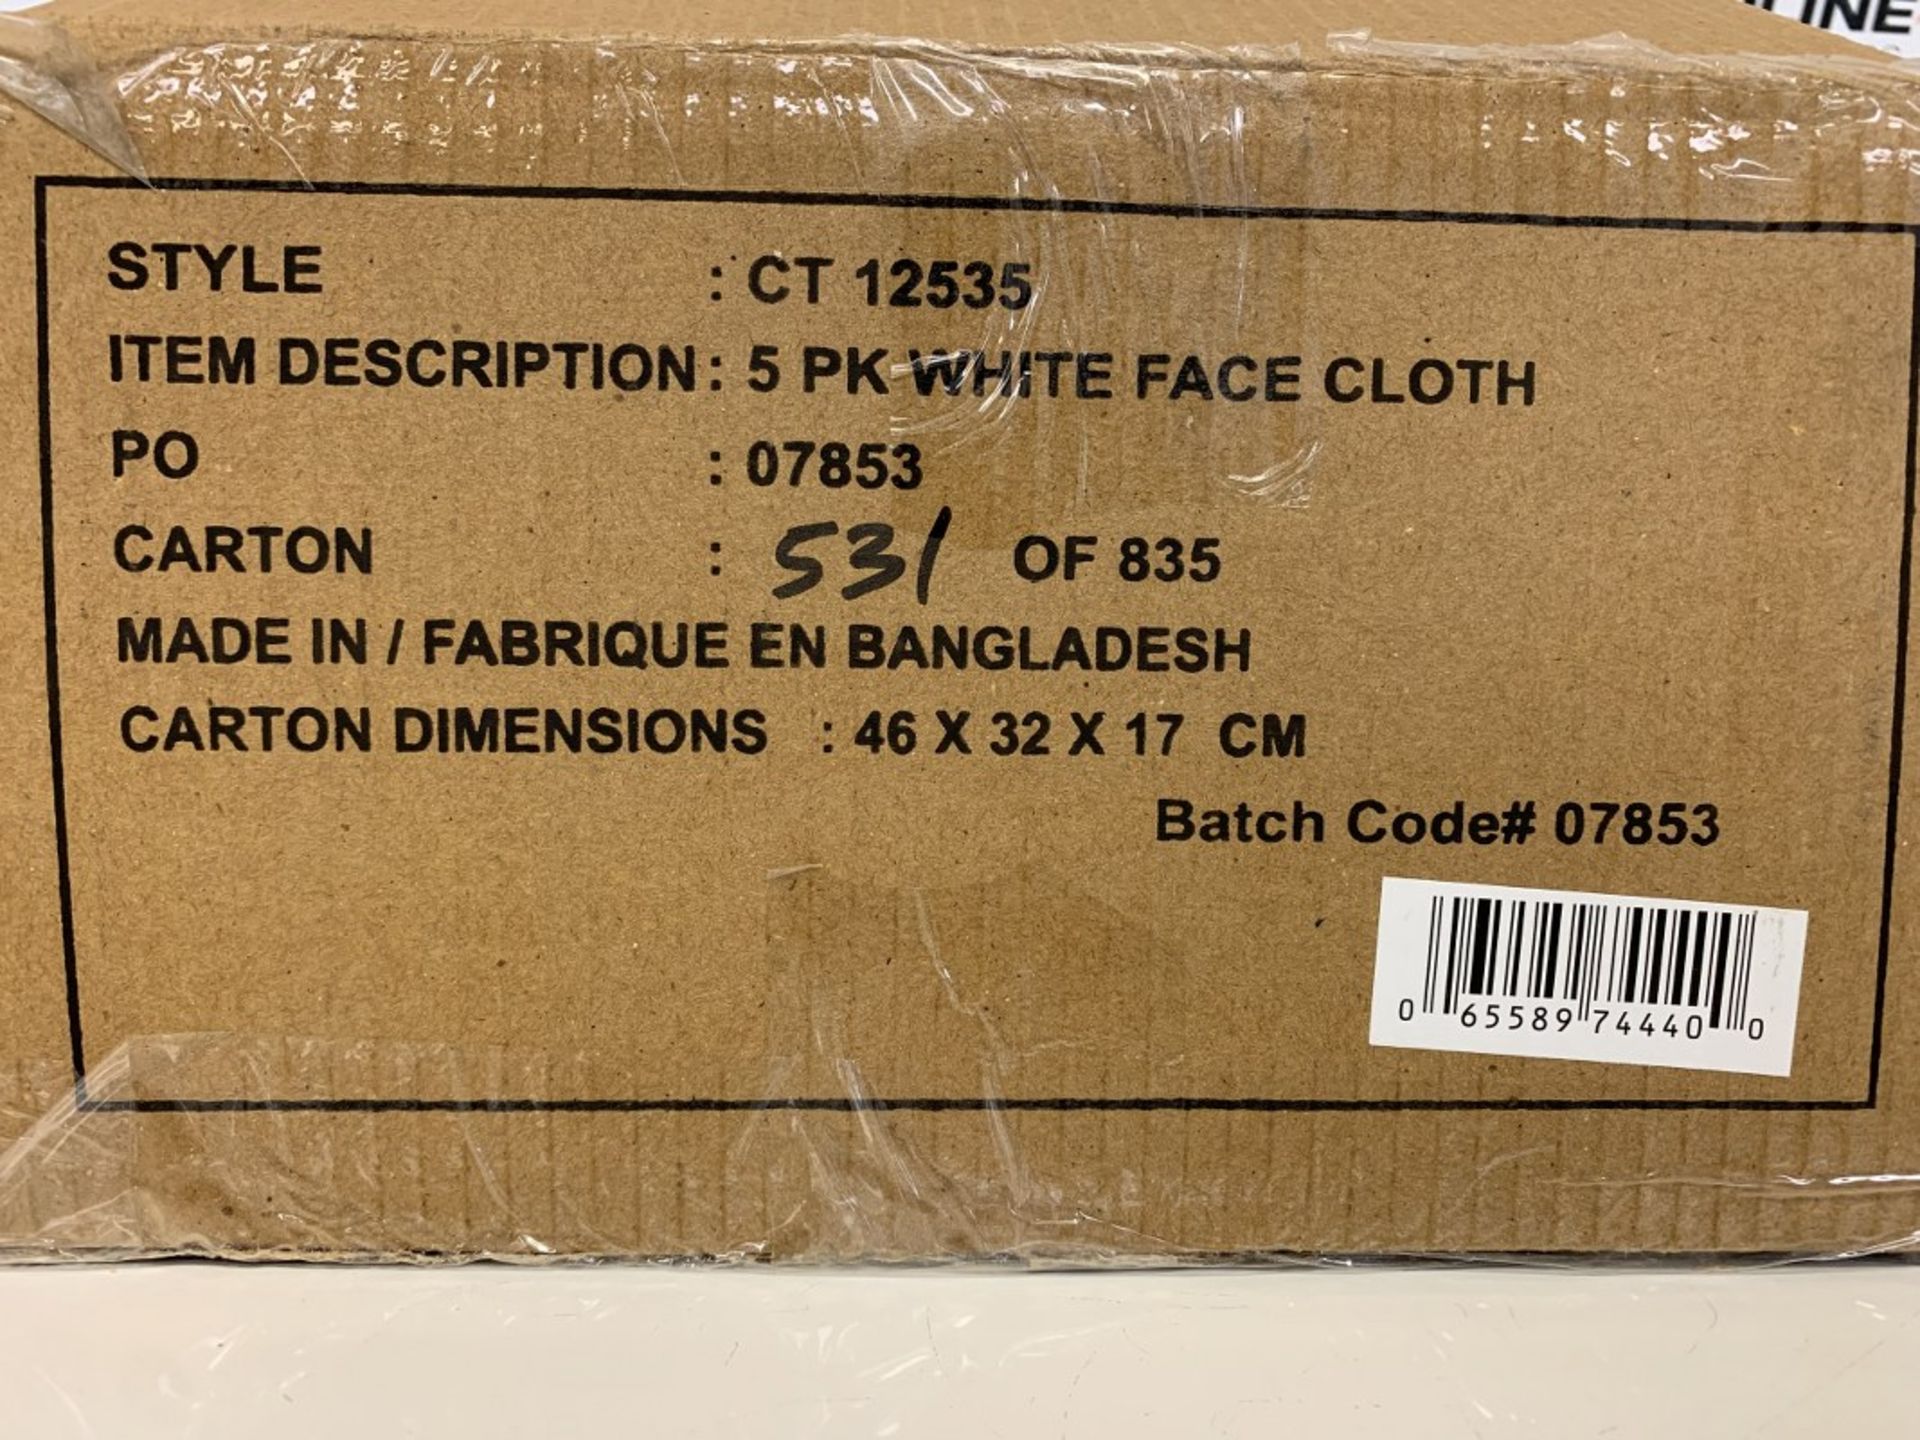 Box Of 5 Pack White Cotton Face Cloth - Image 2 of 2